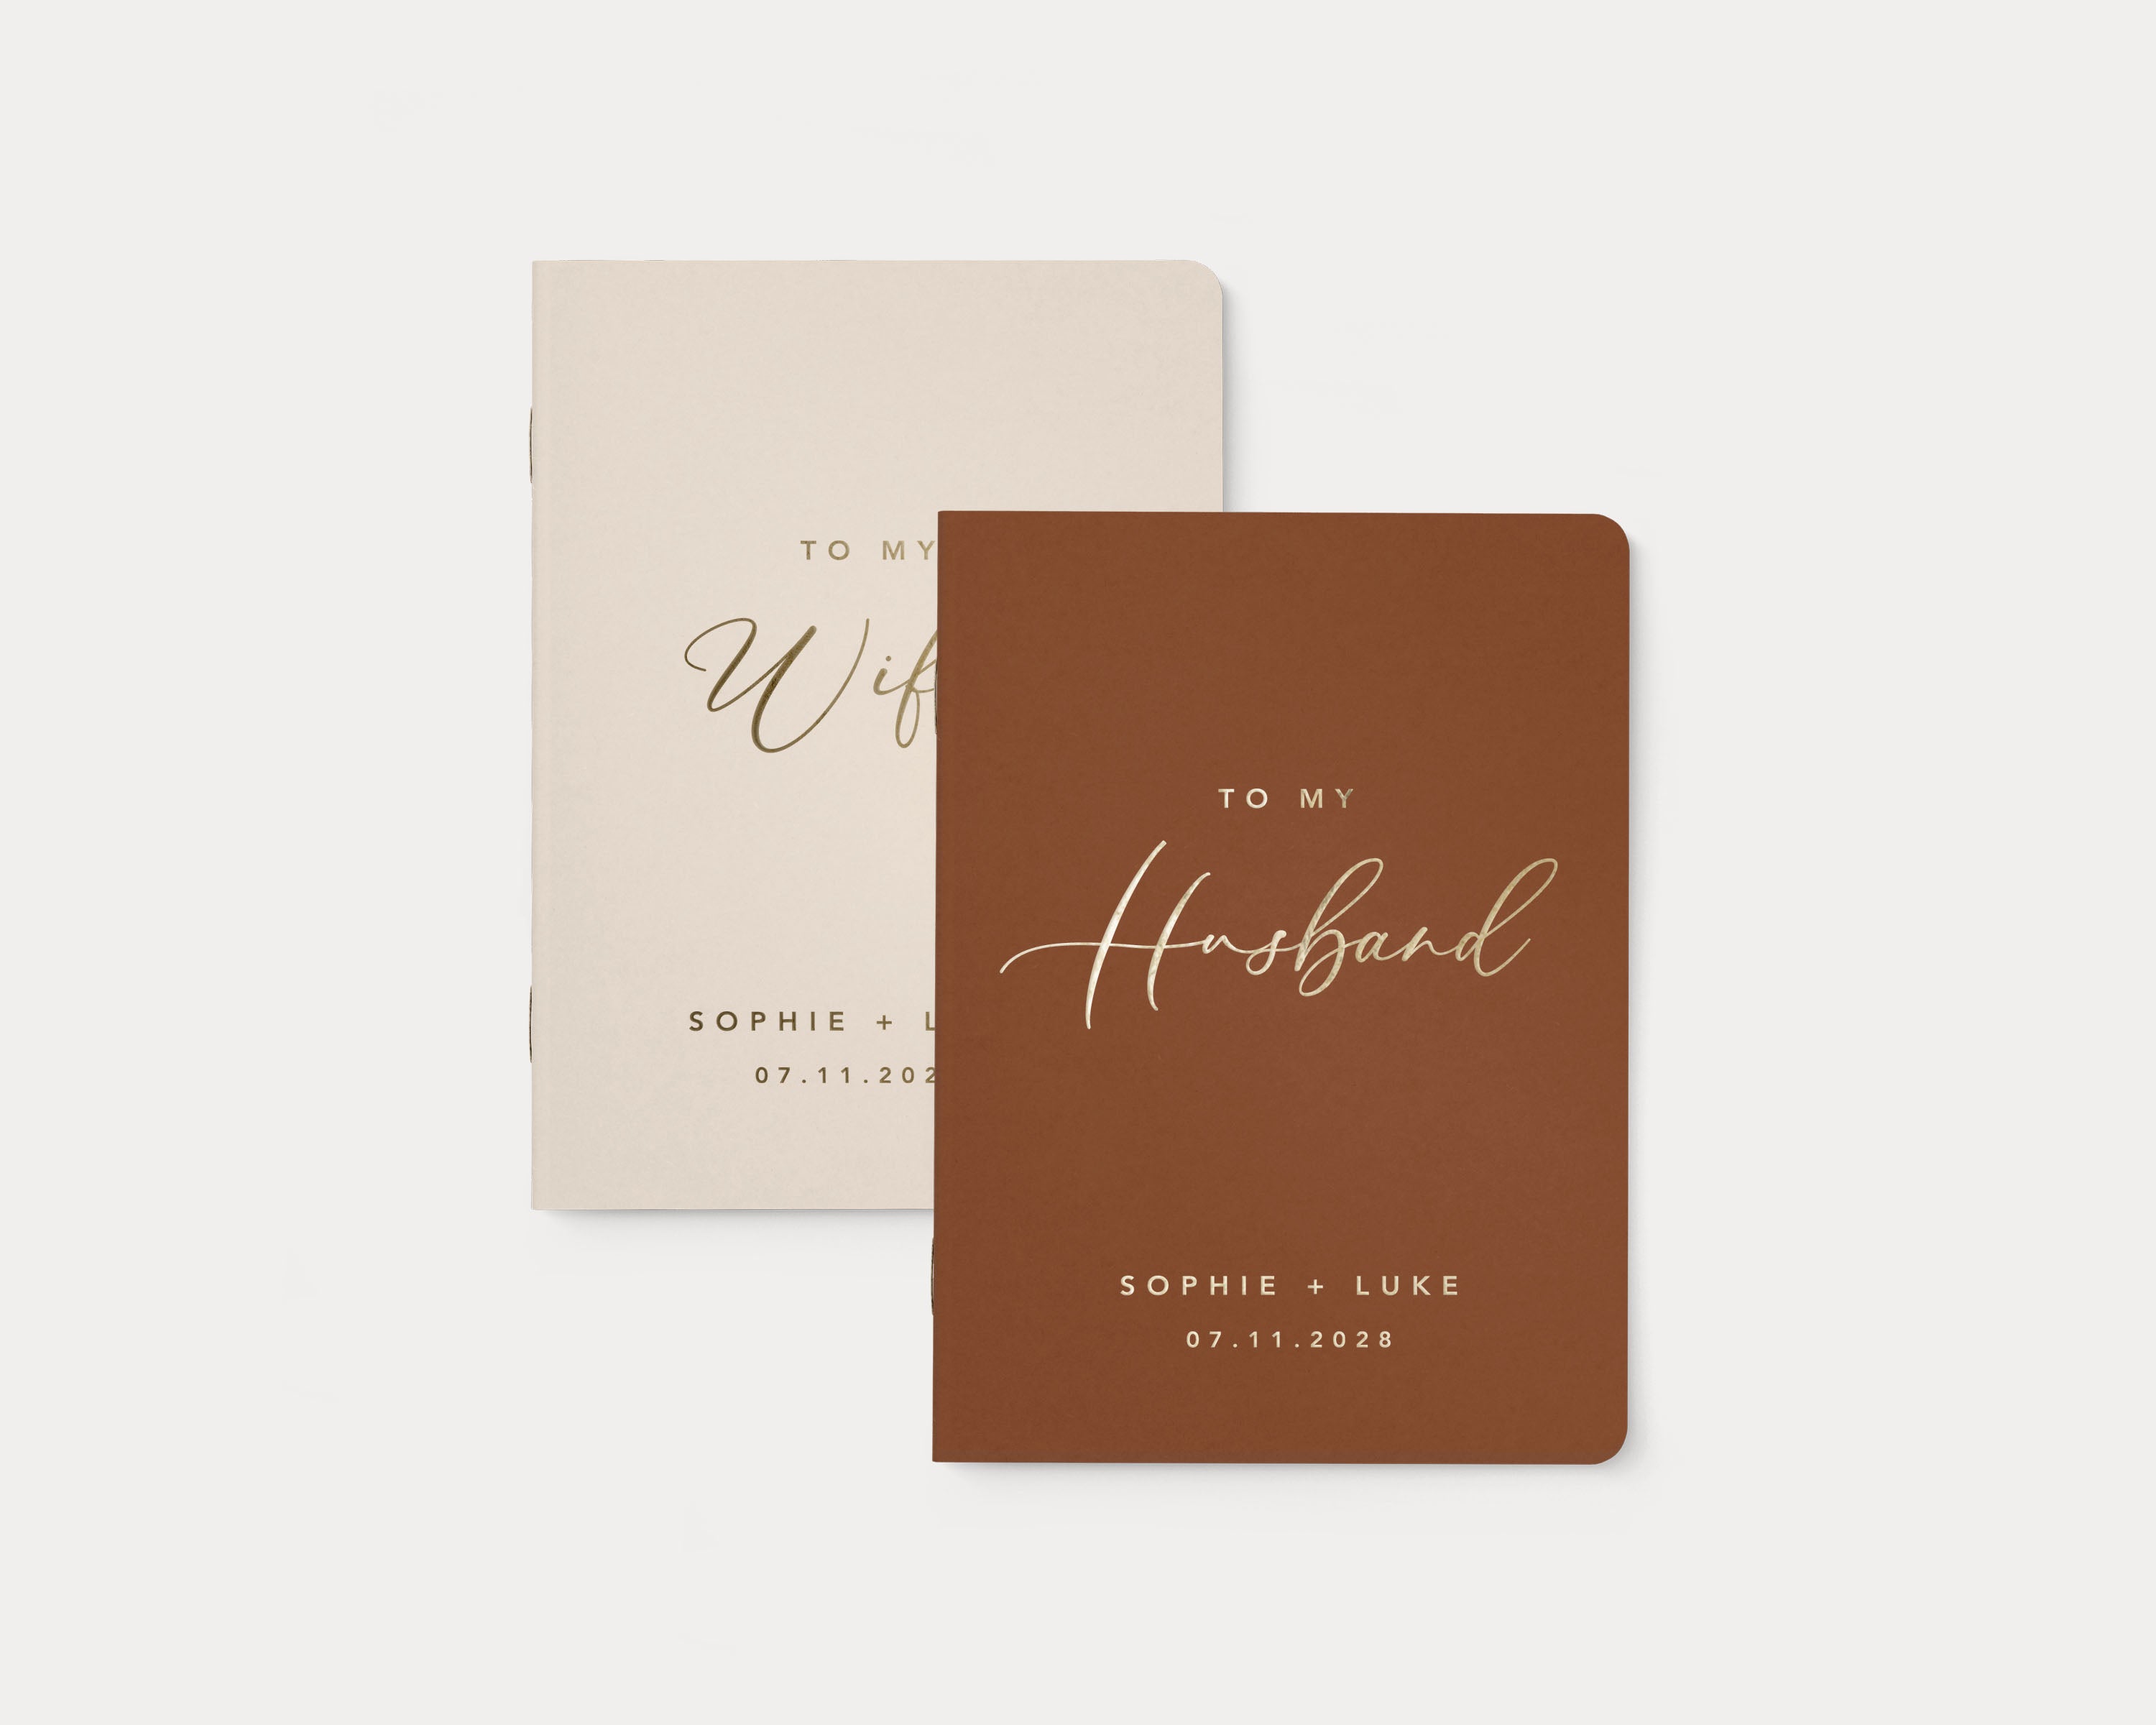 Ivory and terracotta wedding vow books with custom gold foil lettering.